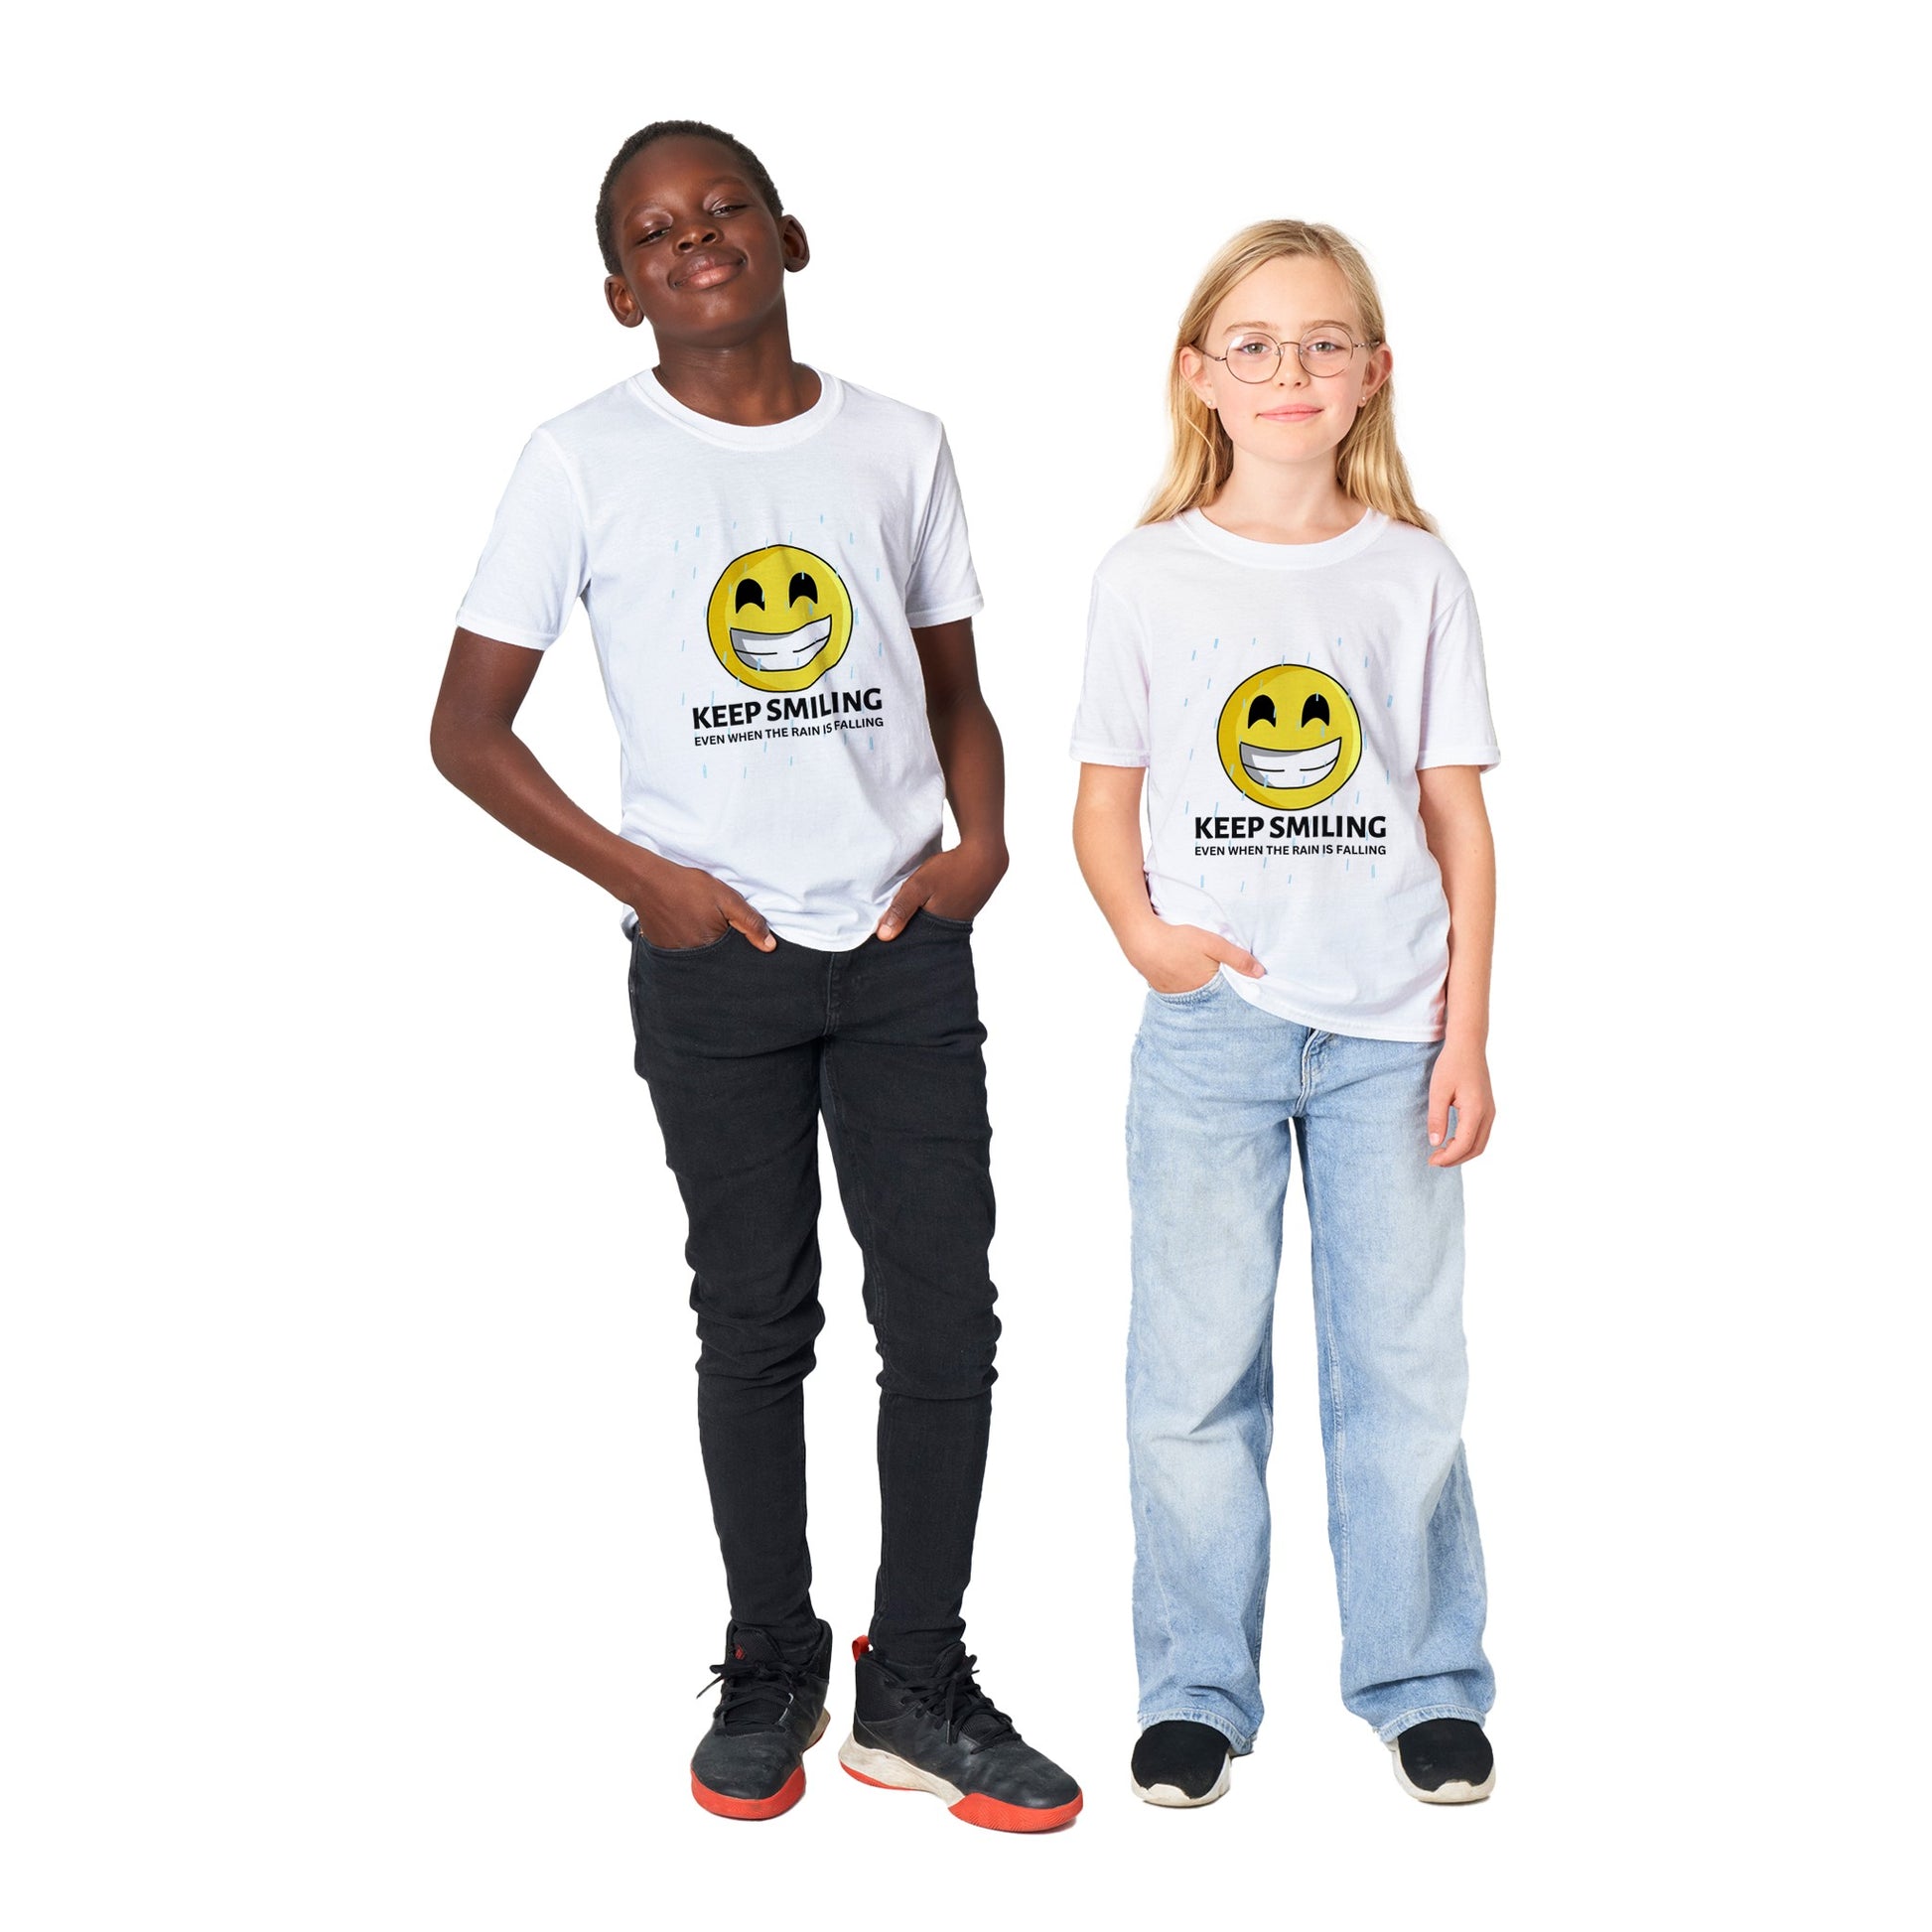 Inspirational Kids T-Shirt with a positive affirmation: "I Keep Smiling, even when the rain is falling". An image of an emoji smiling and drop of rain - white tee